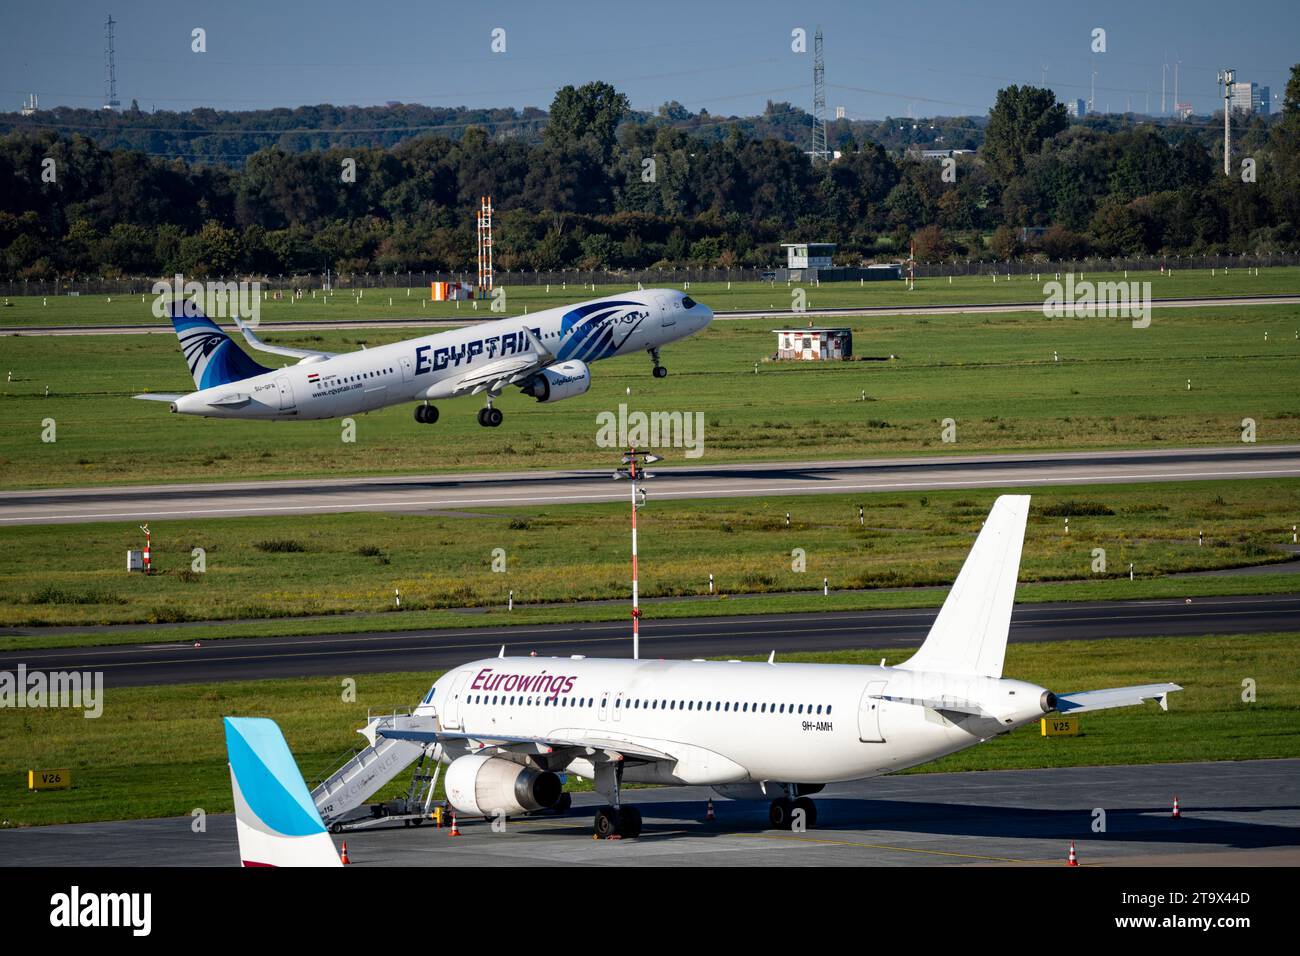 Düsseldorf Airport, Egyptair Airbus A321neo on take-off, Eurowings Airbus in parking position Stock Photo